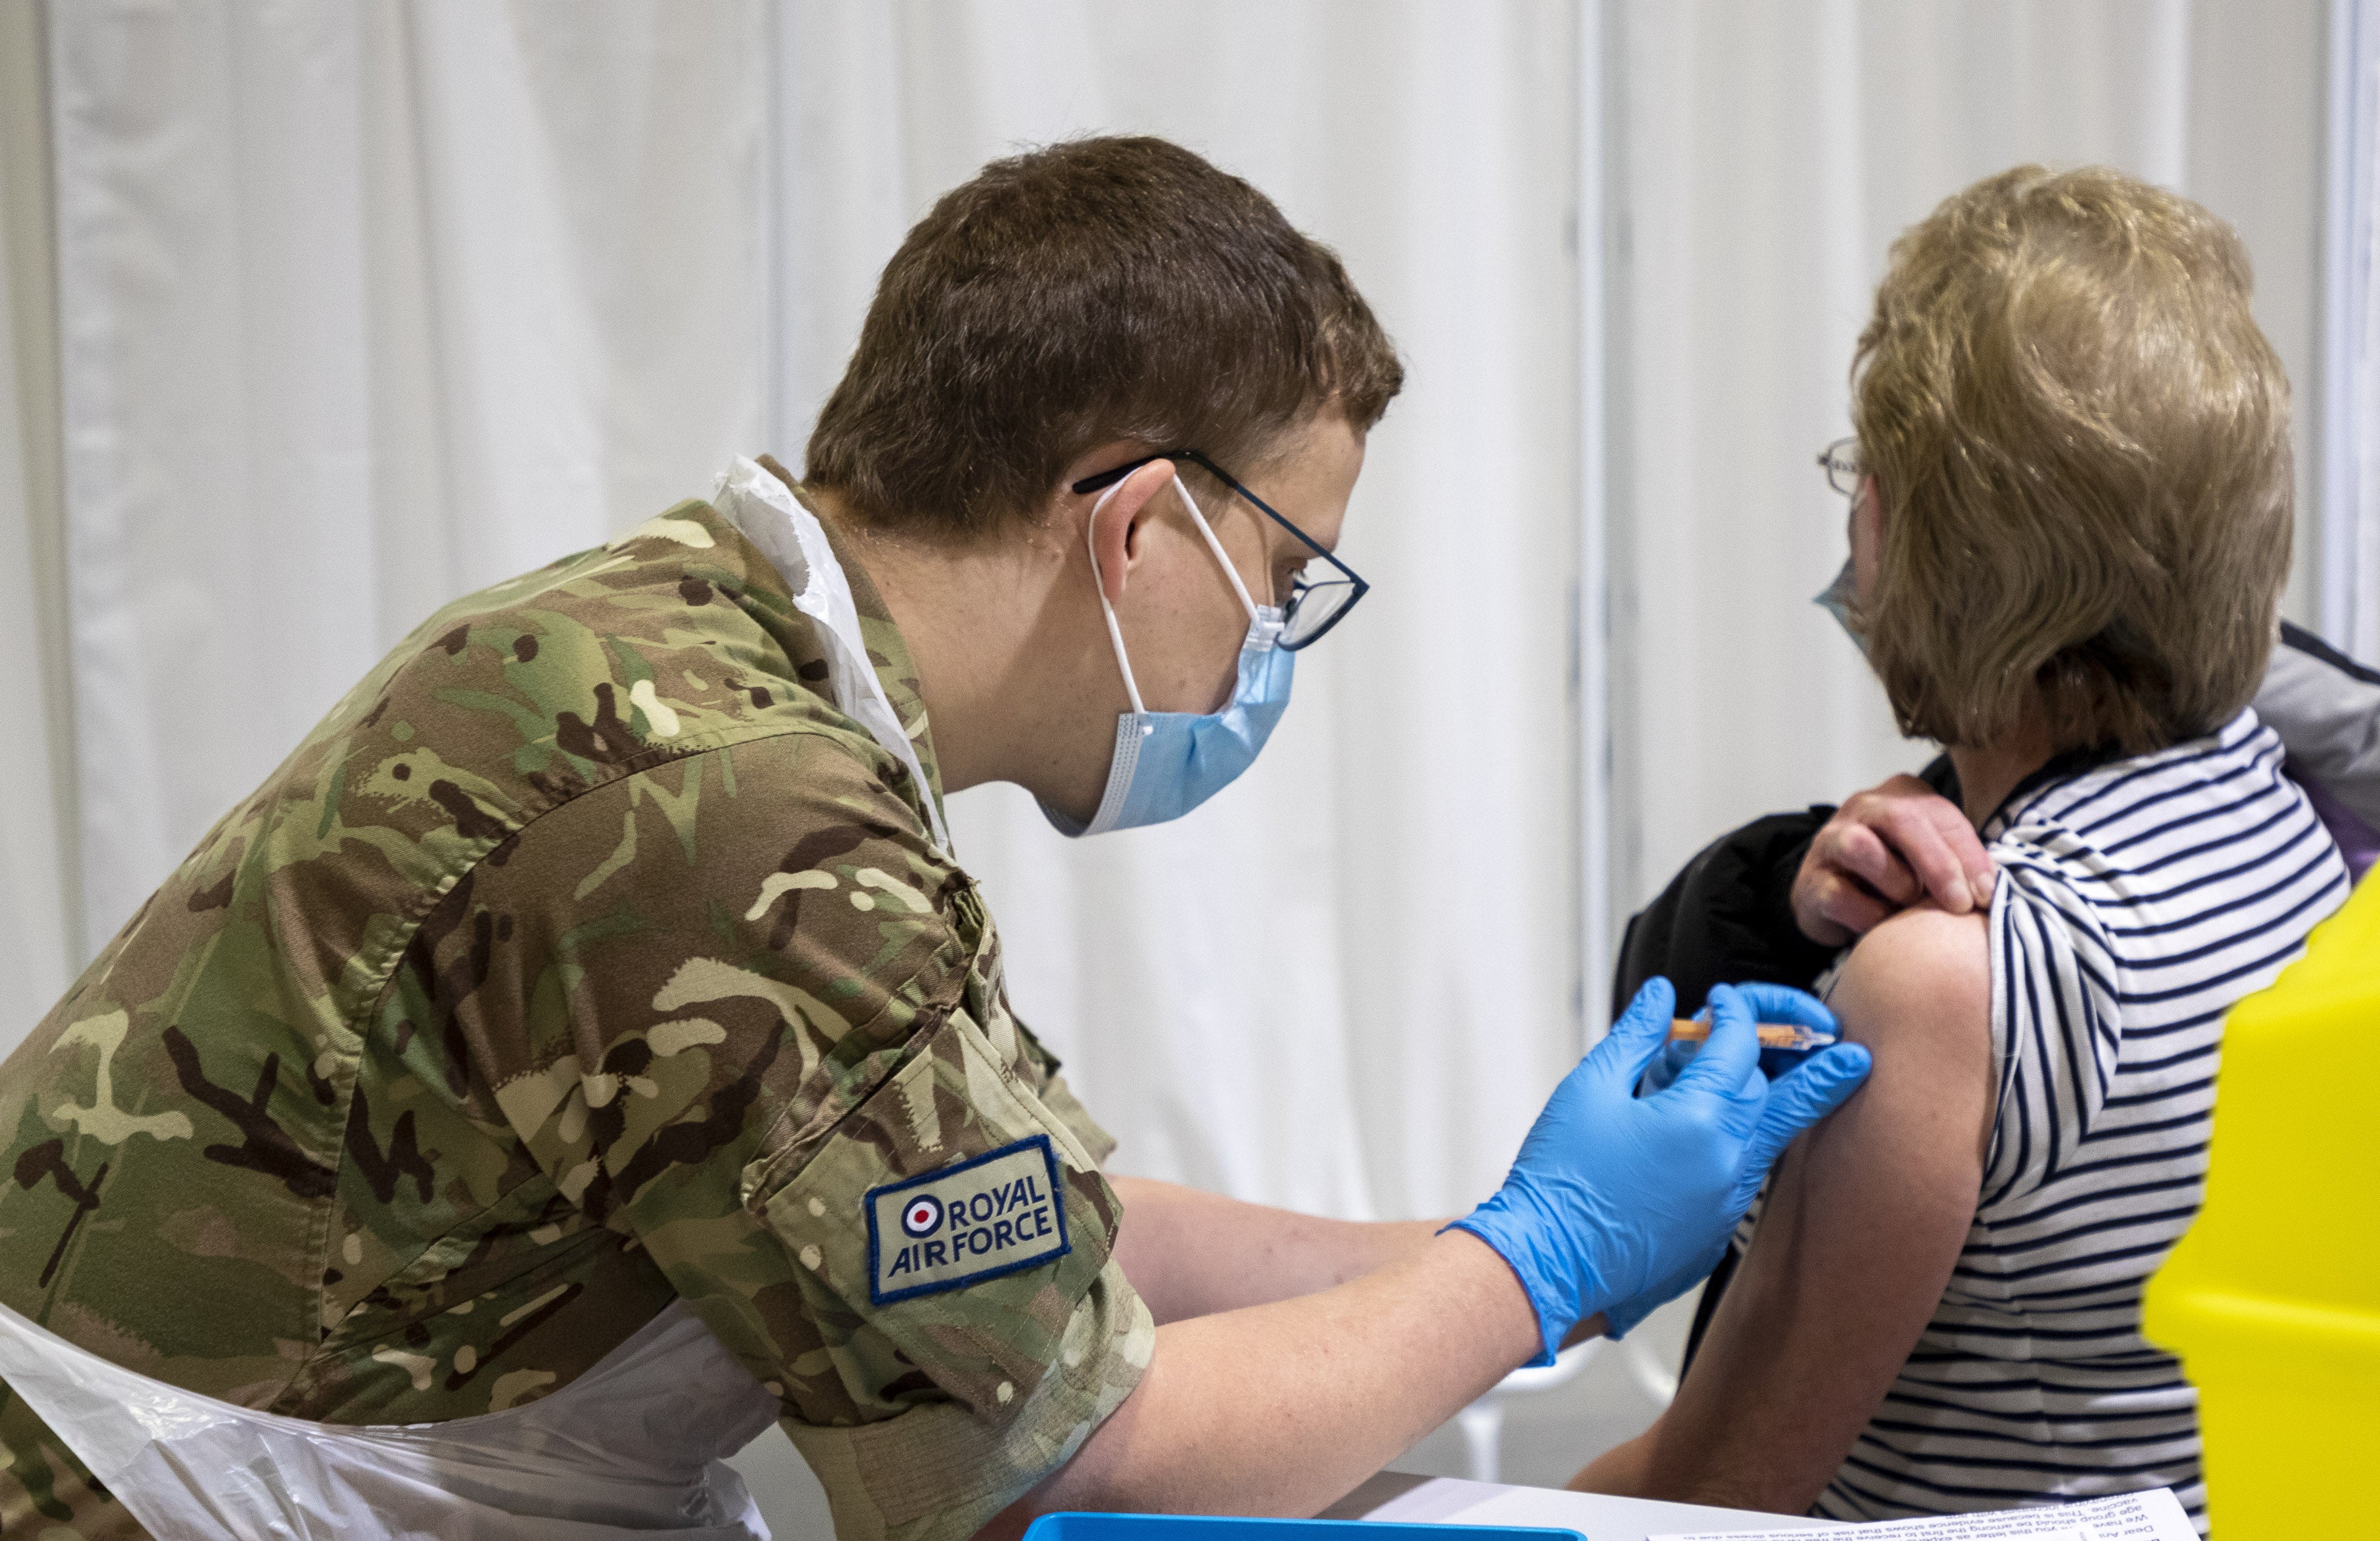 A member of the Royal Air Force giving a Covid-19 vaccination. Across the UK, members of the Armed Forces have been working to support the rollout of the coronavirus vaccine programme, with new deployments planned in Scotland and North West England. Issue date: Sunday June 6, 2021.